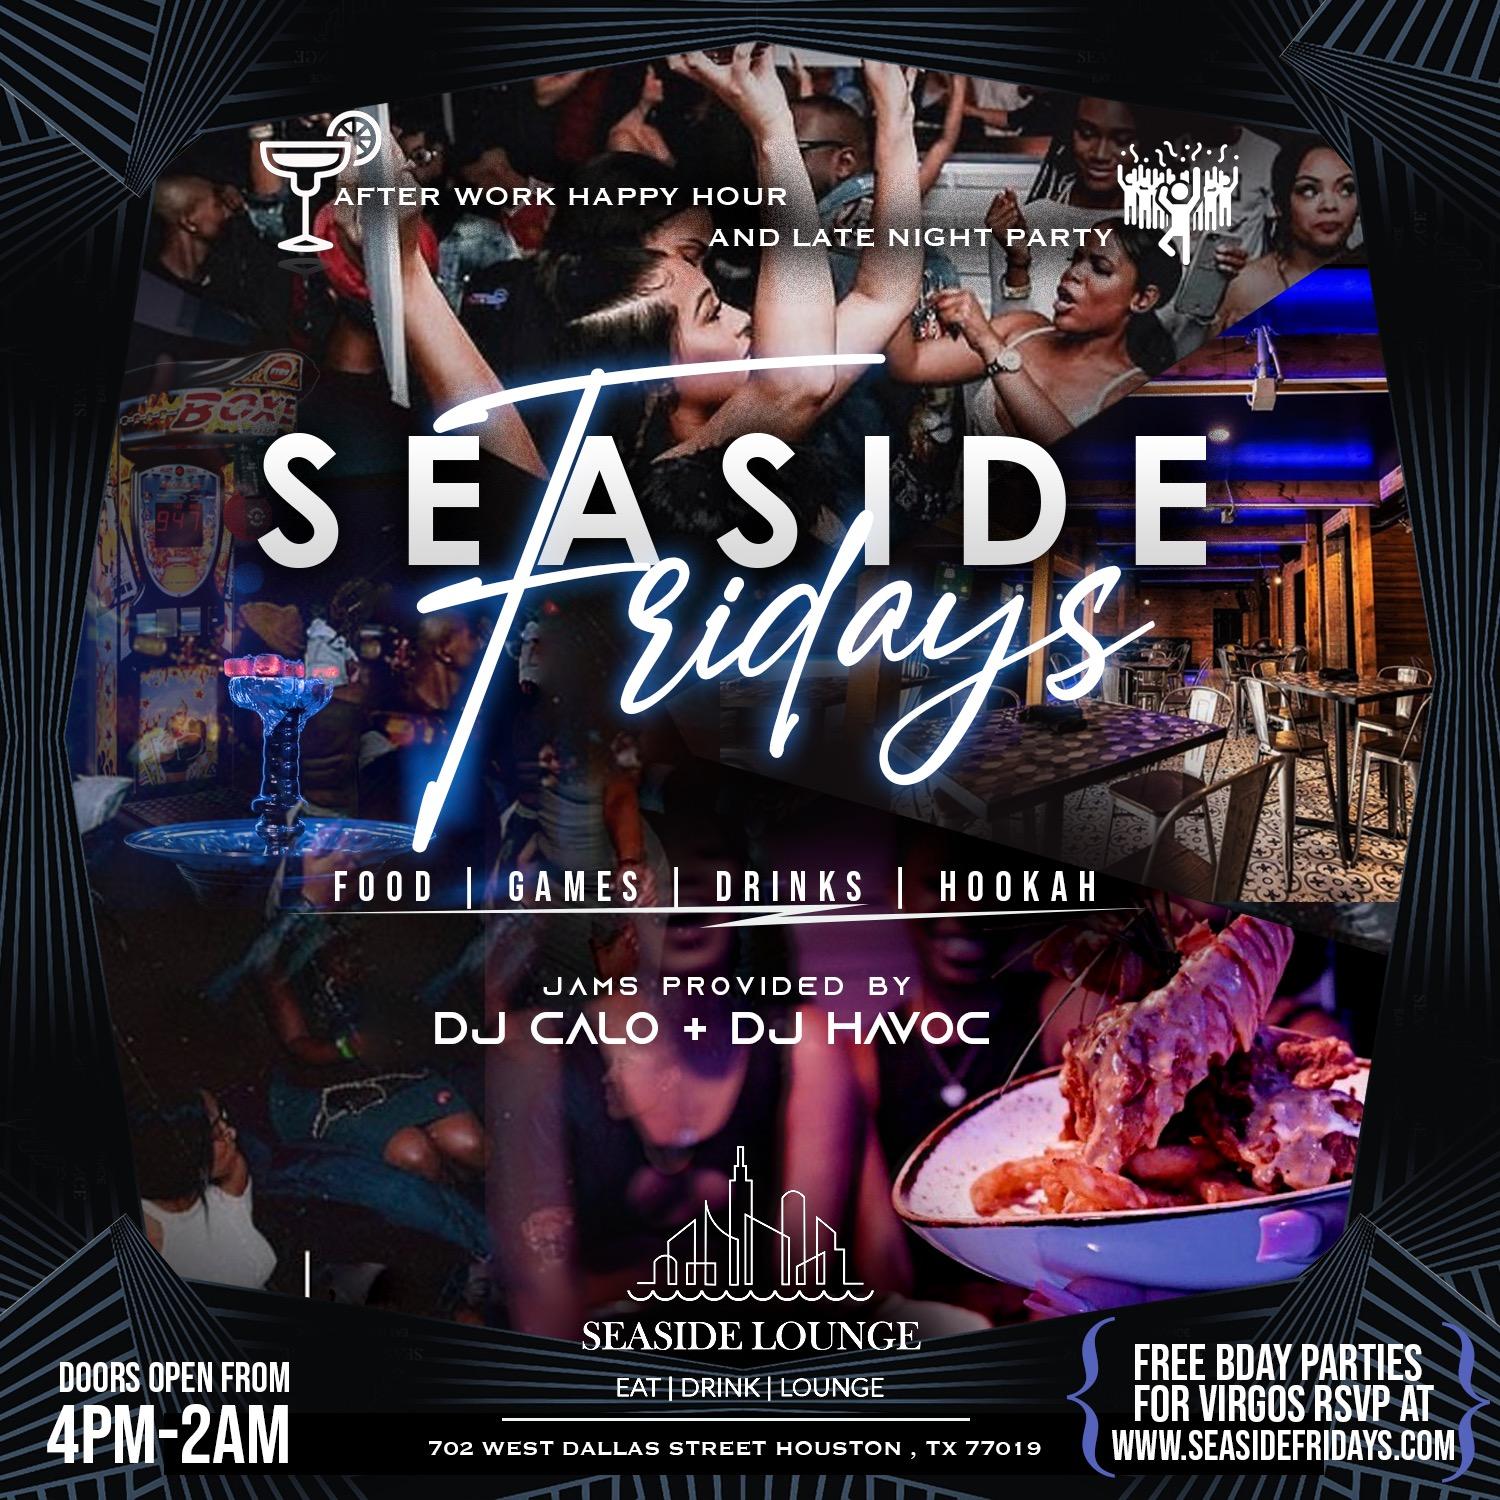 Seaside Friday’s “We Party Different”